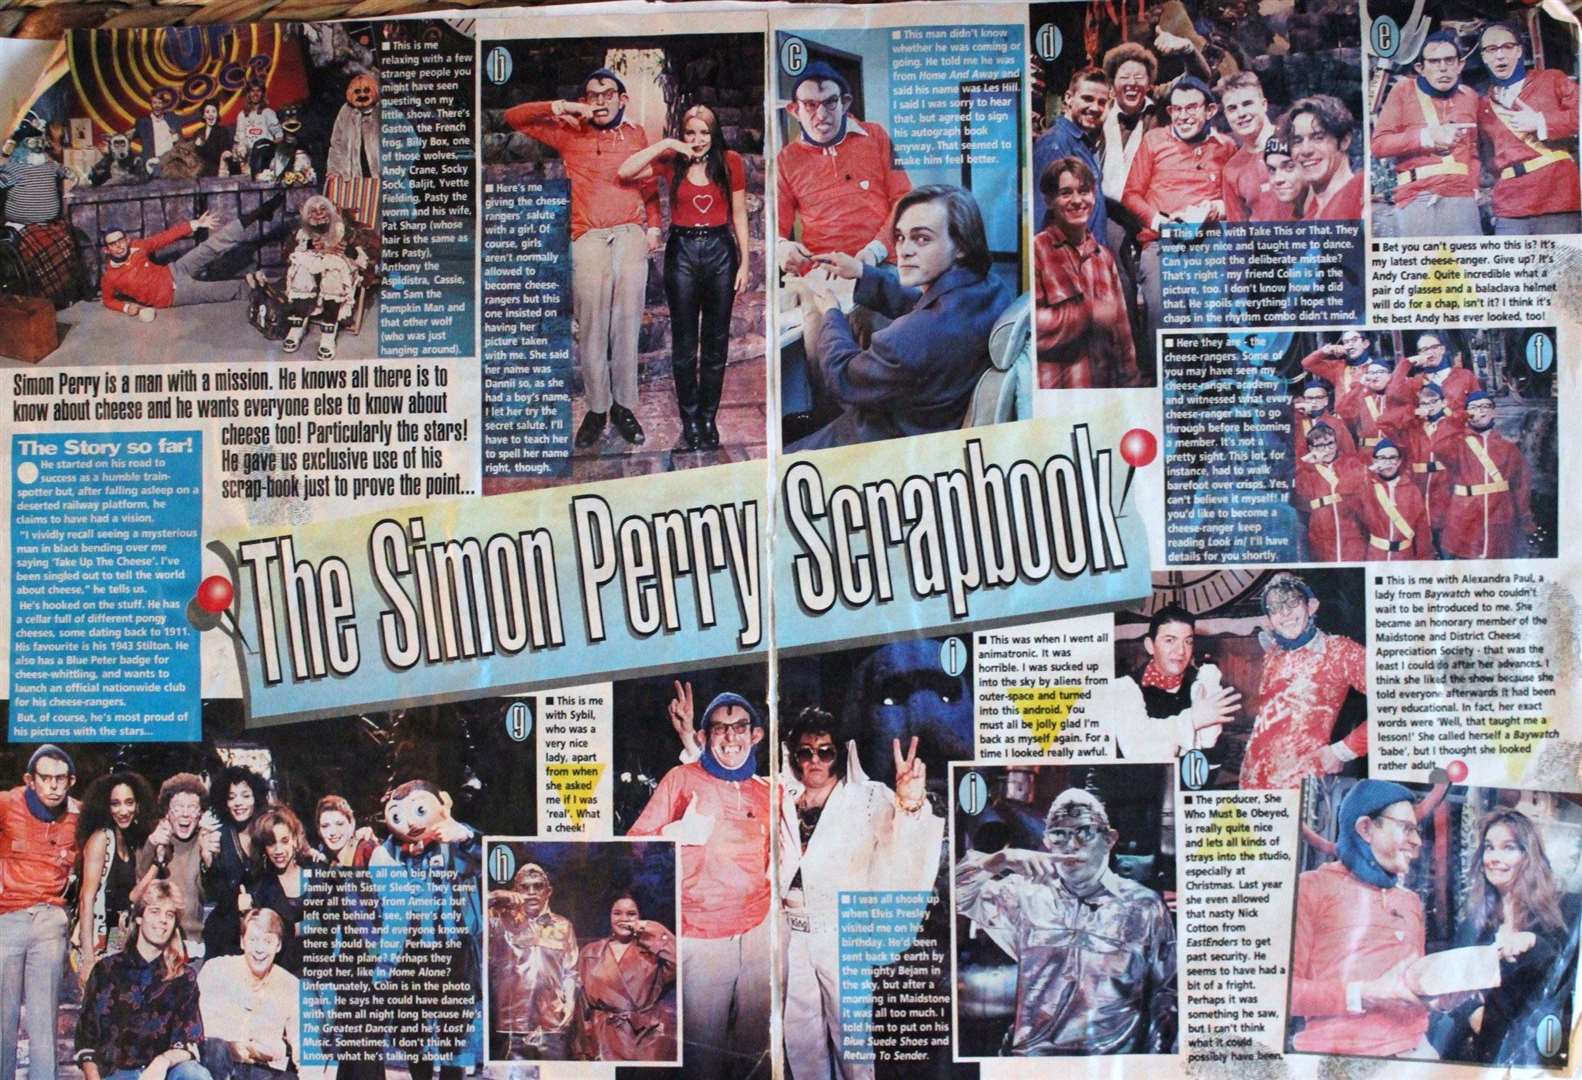 The Simon Perry celebrity cheese scrap book created by Look In magazine from the What's Up Doc? TV programme from the Maidstone studios